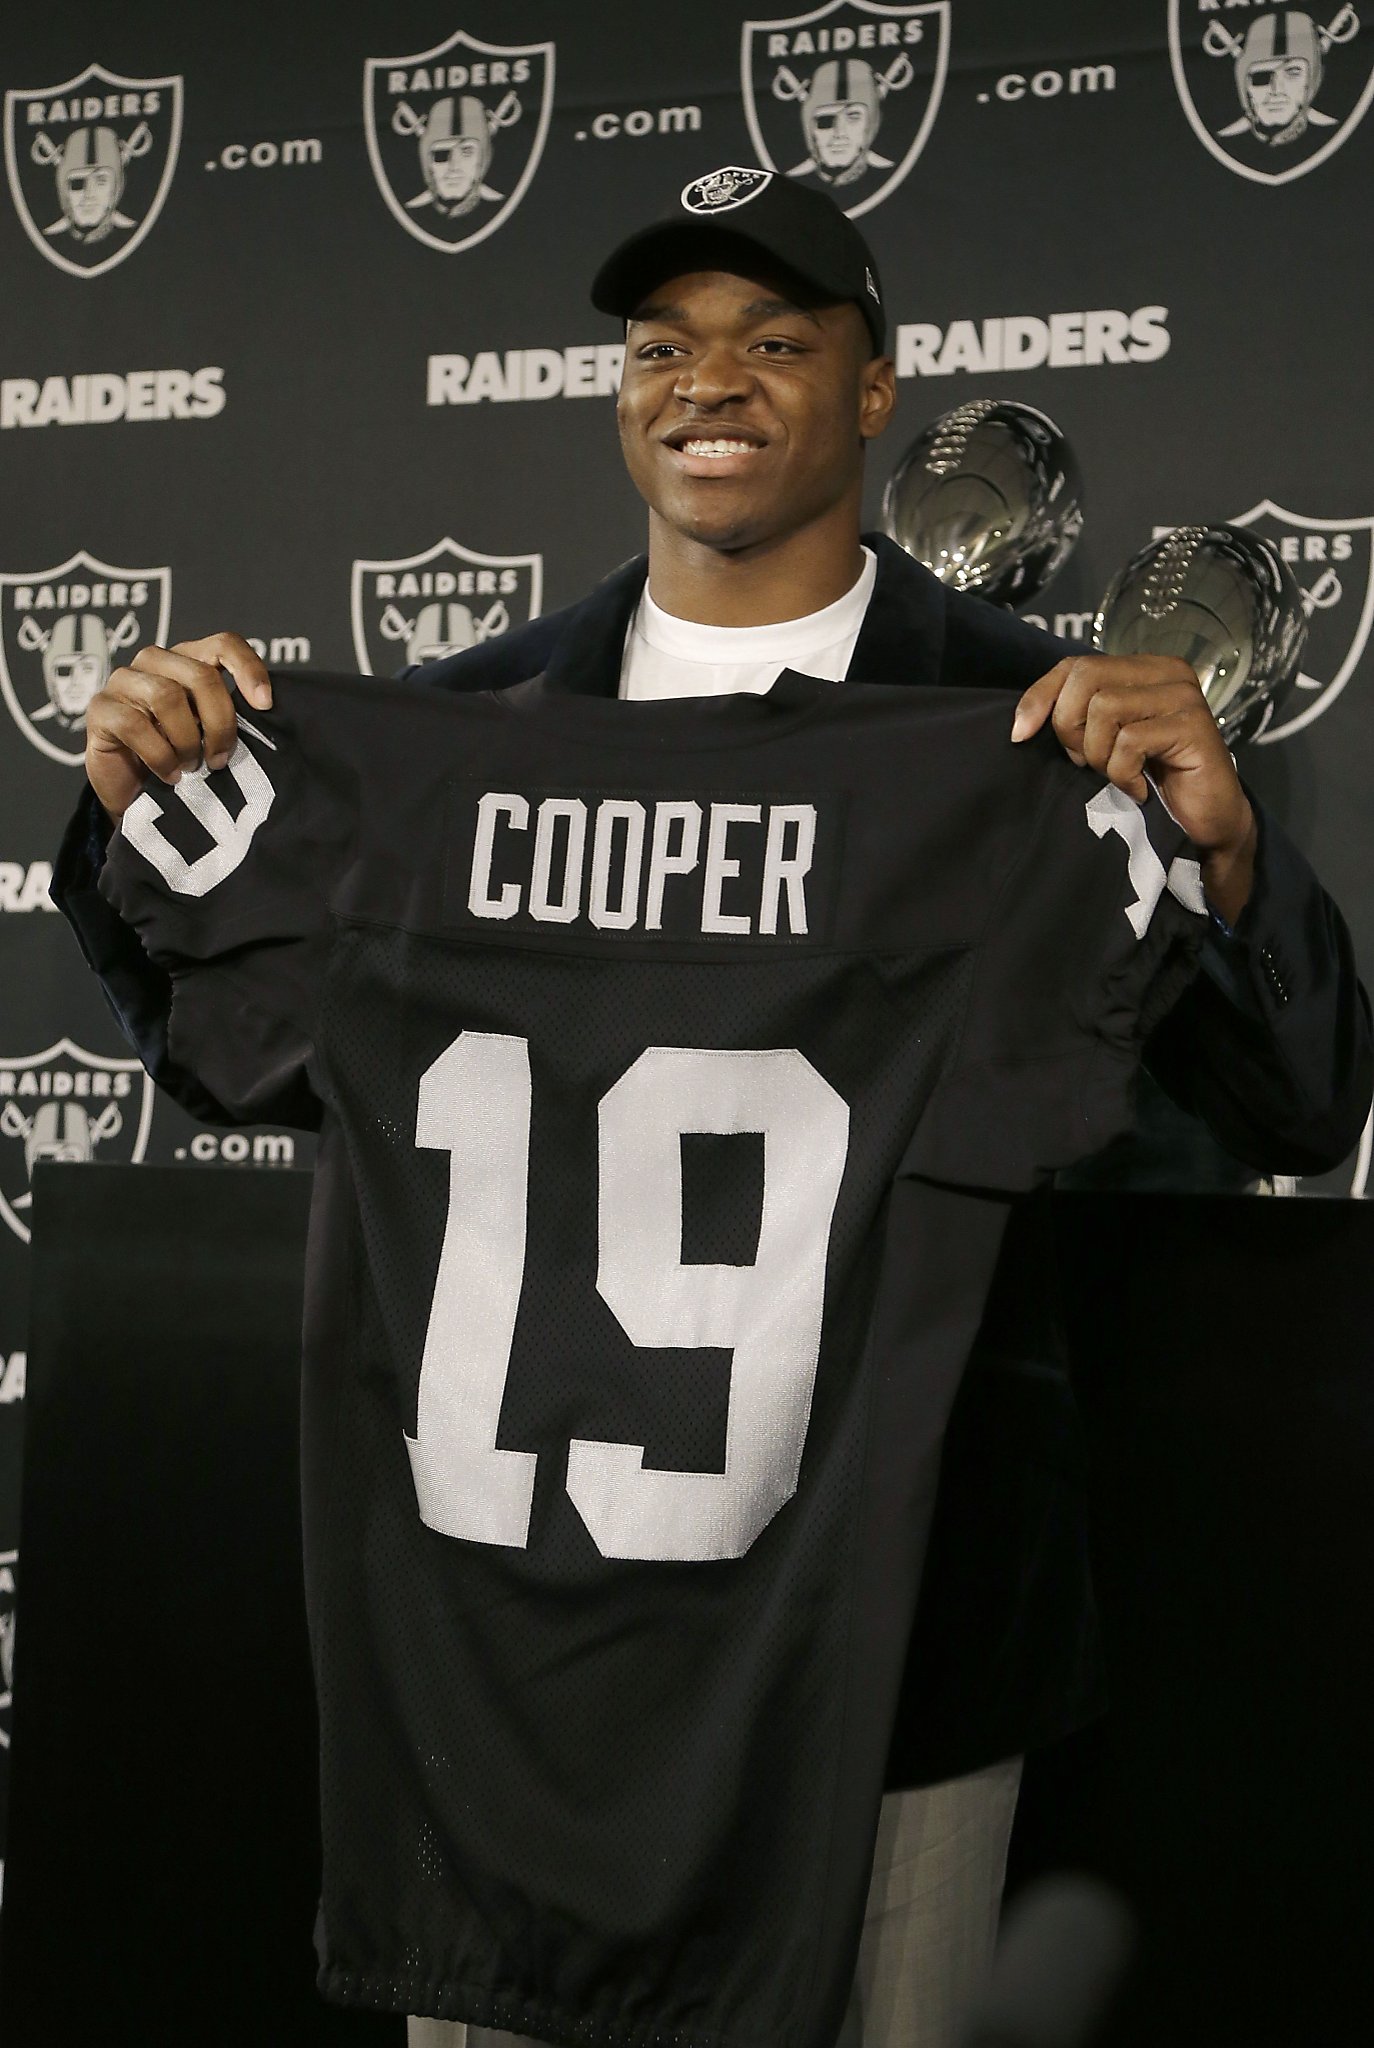 Raiders' pick Cooper is all business, time